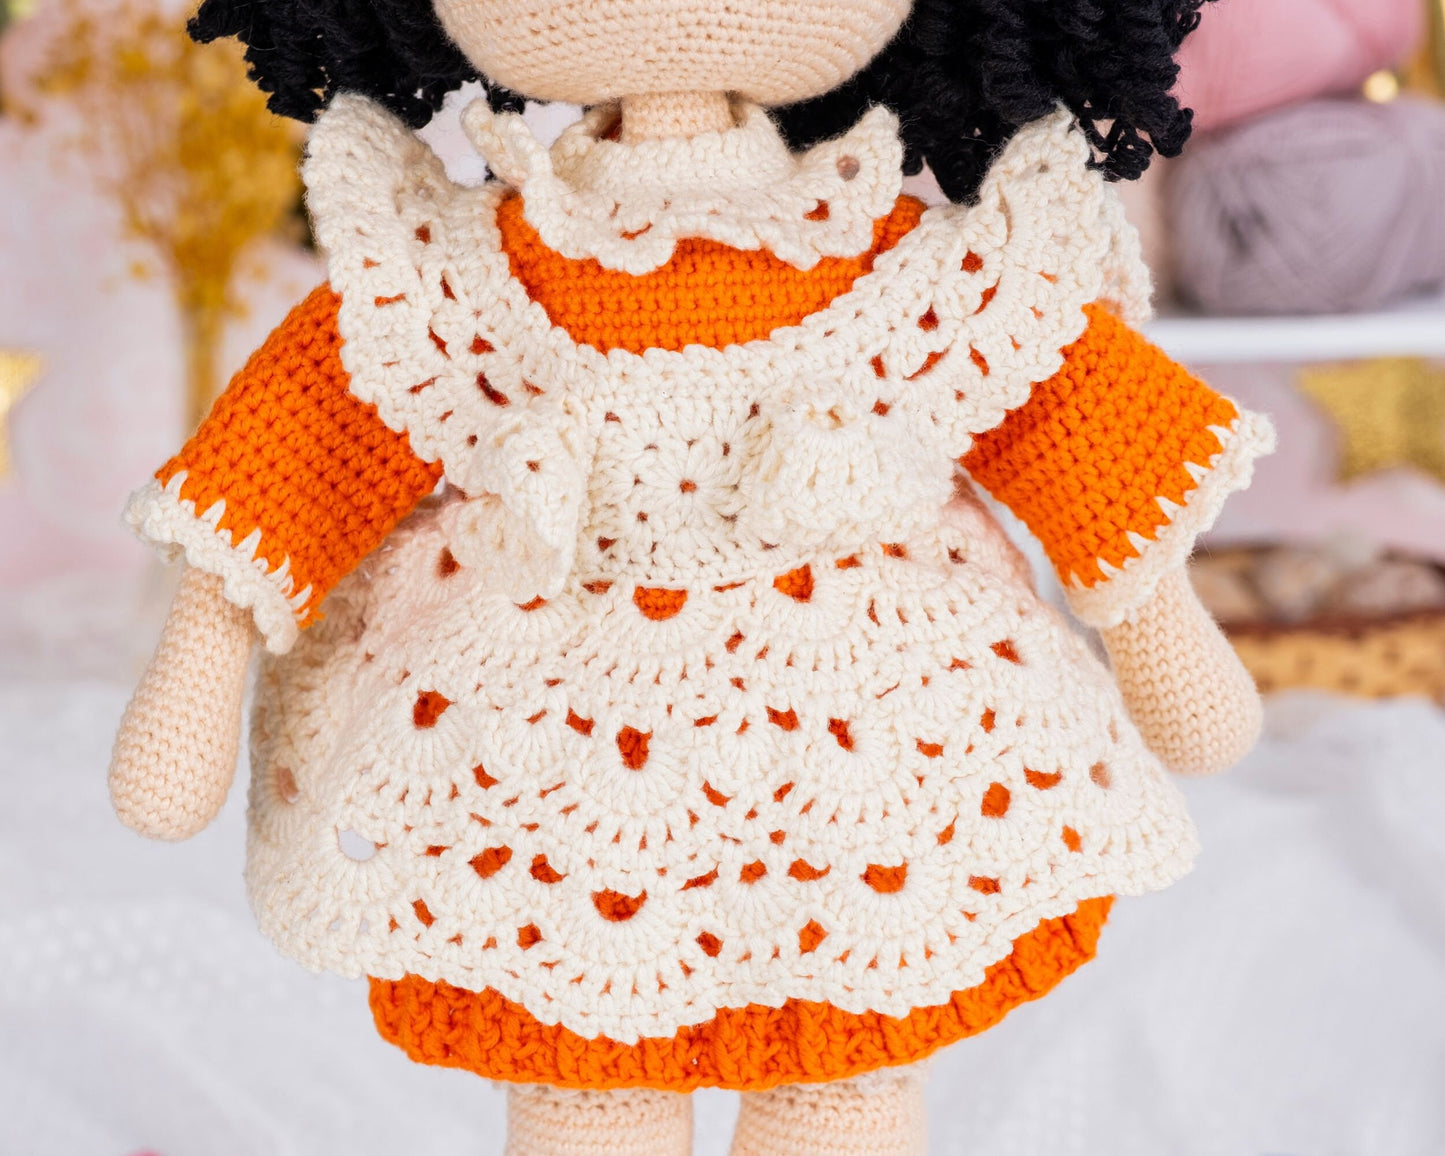 Crochet Doll Vintage Maid with Dress, Amigurumi Doll with Vintage Clothes